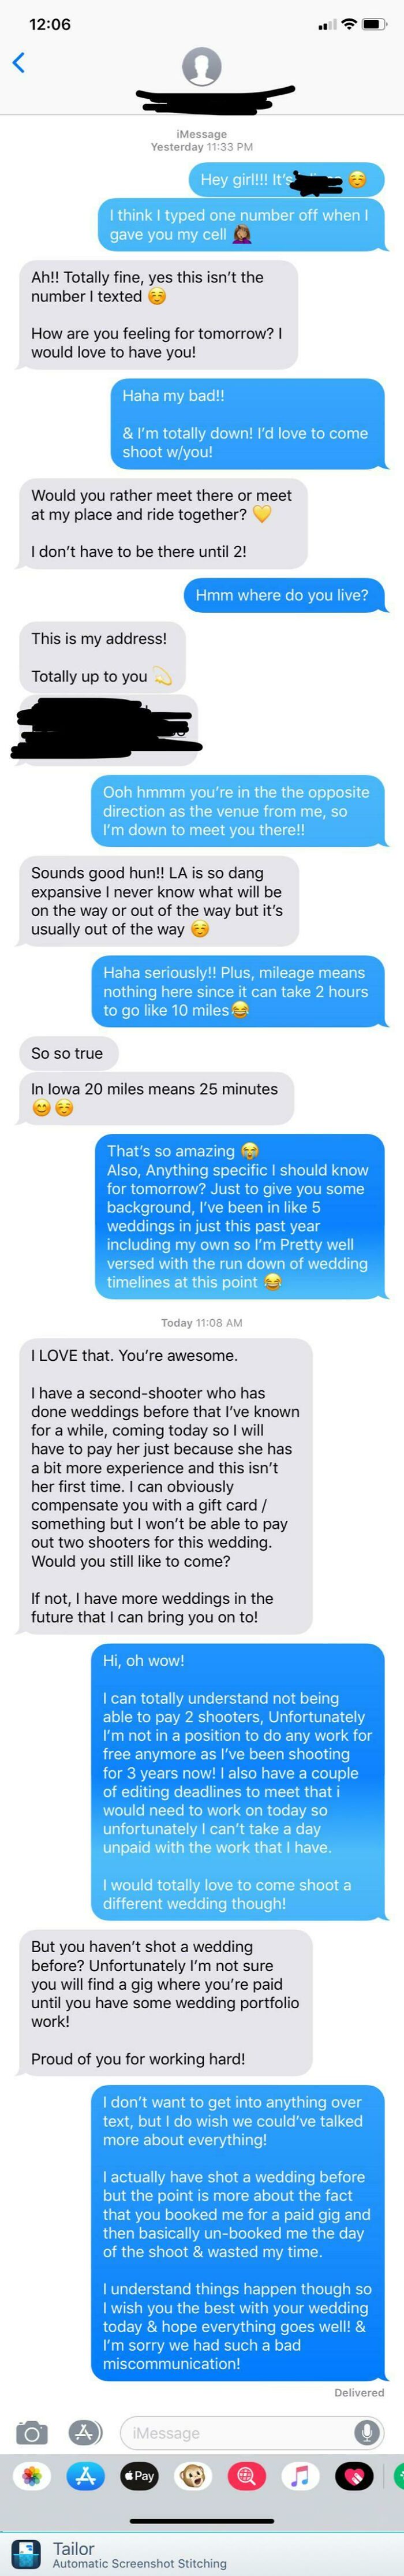 Photog Asks Me Shoot A Wedding W/Her, Initially Offering Me $150. On The Day Of, She Revokes Her Offer To Pay Me & Makes Passive Aggressive Comments About My Career Even Though I’ve Shot For Major Networks, Celebs, TV Shows, Etc. She Just Moved Here From Iowa&thinks She Owns The Wedding Industry